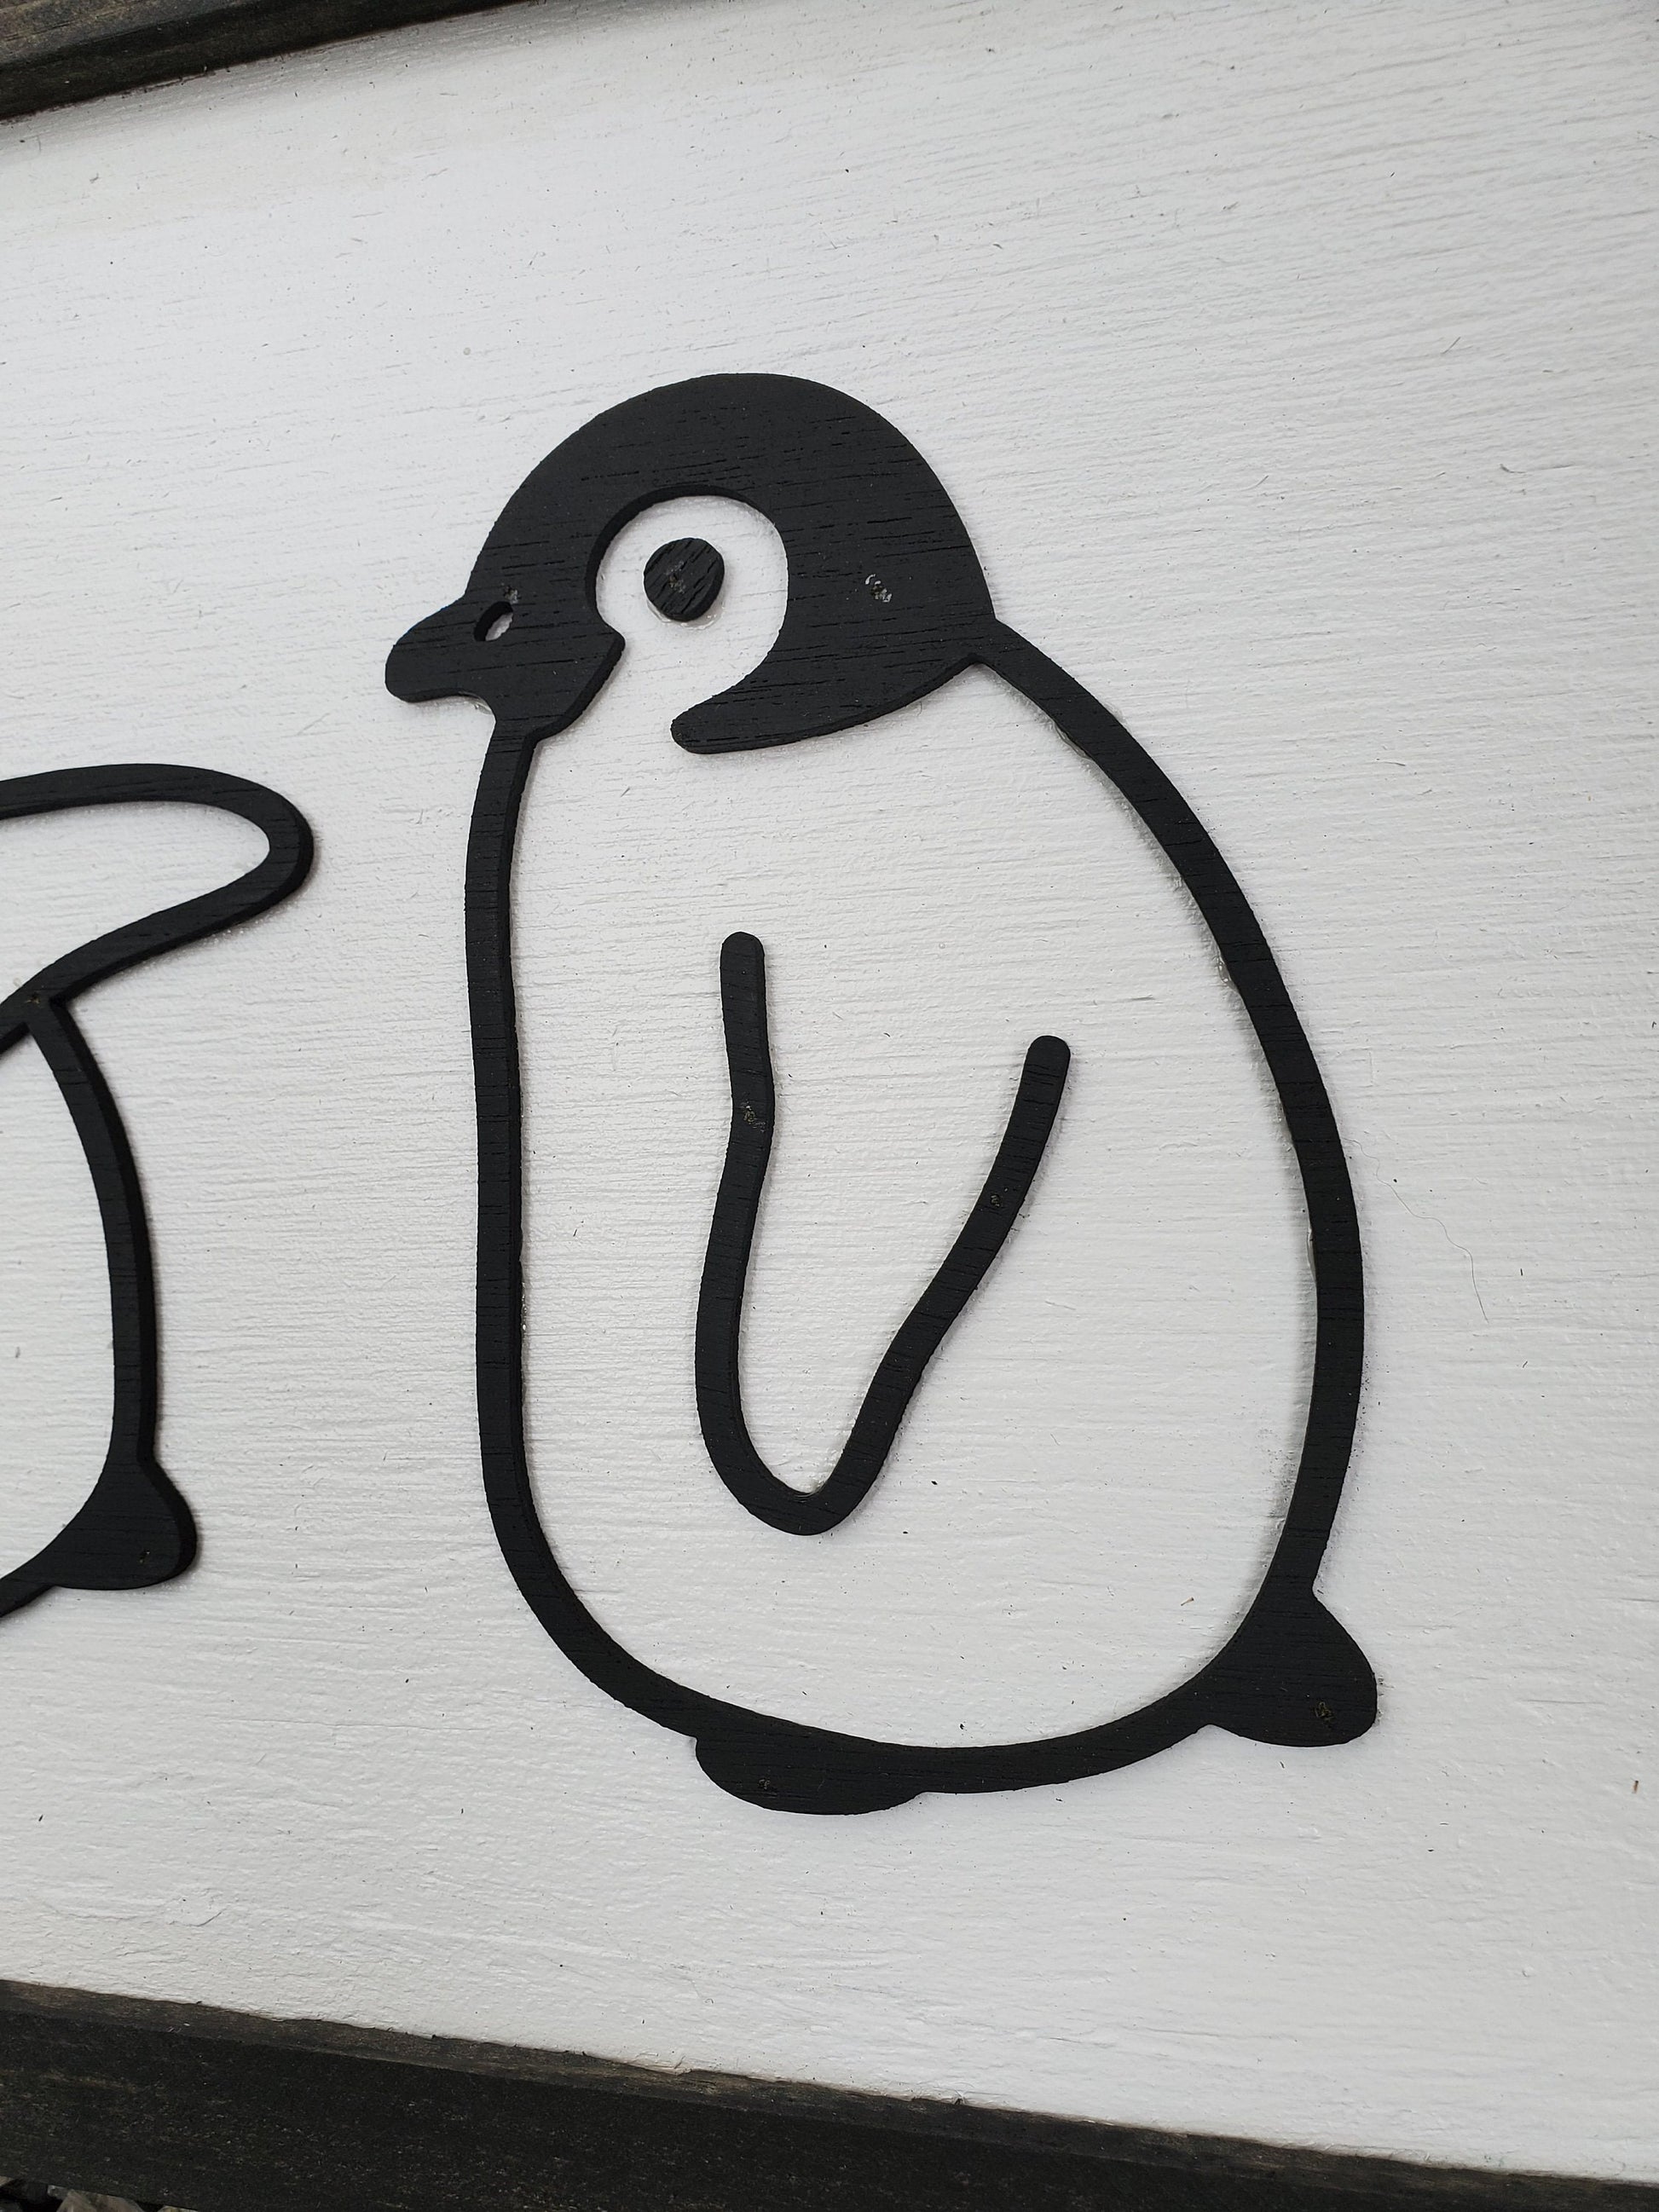 Penguins, Baby, Babies, Nursery, Winter, Silhouette, Line Art, 3D, Raised Text Sign, Rustic, Farmhouse, Shabby Chic, Wood, White and Black